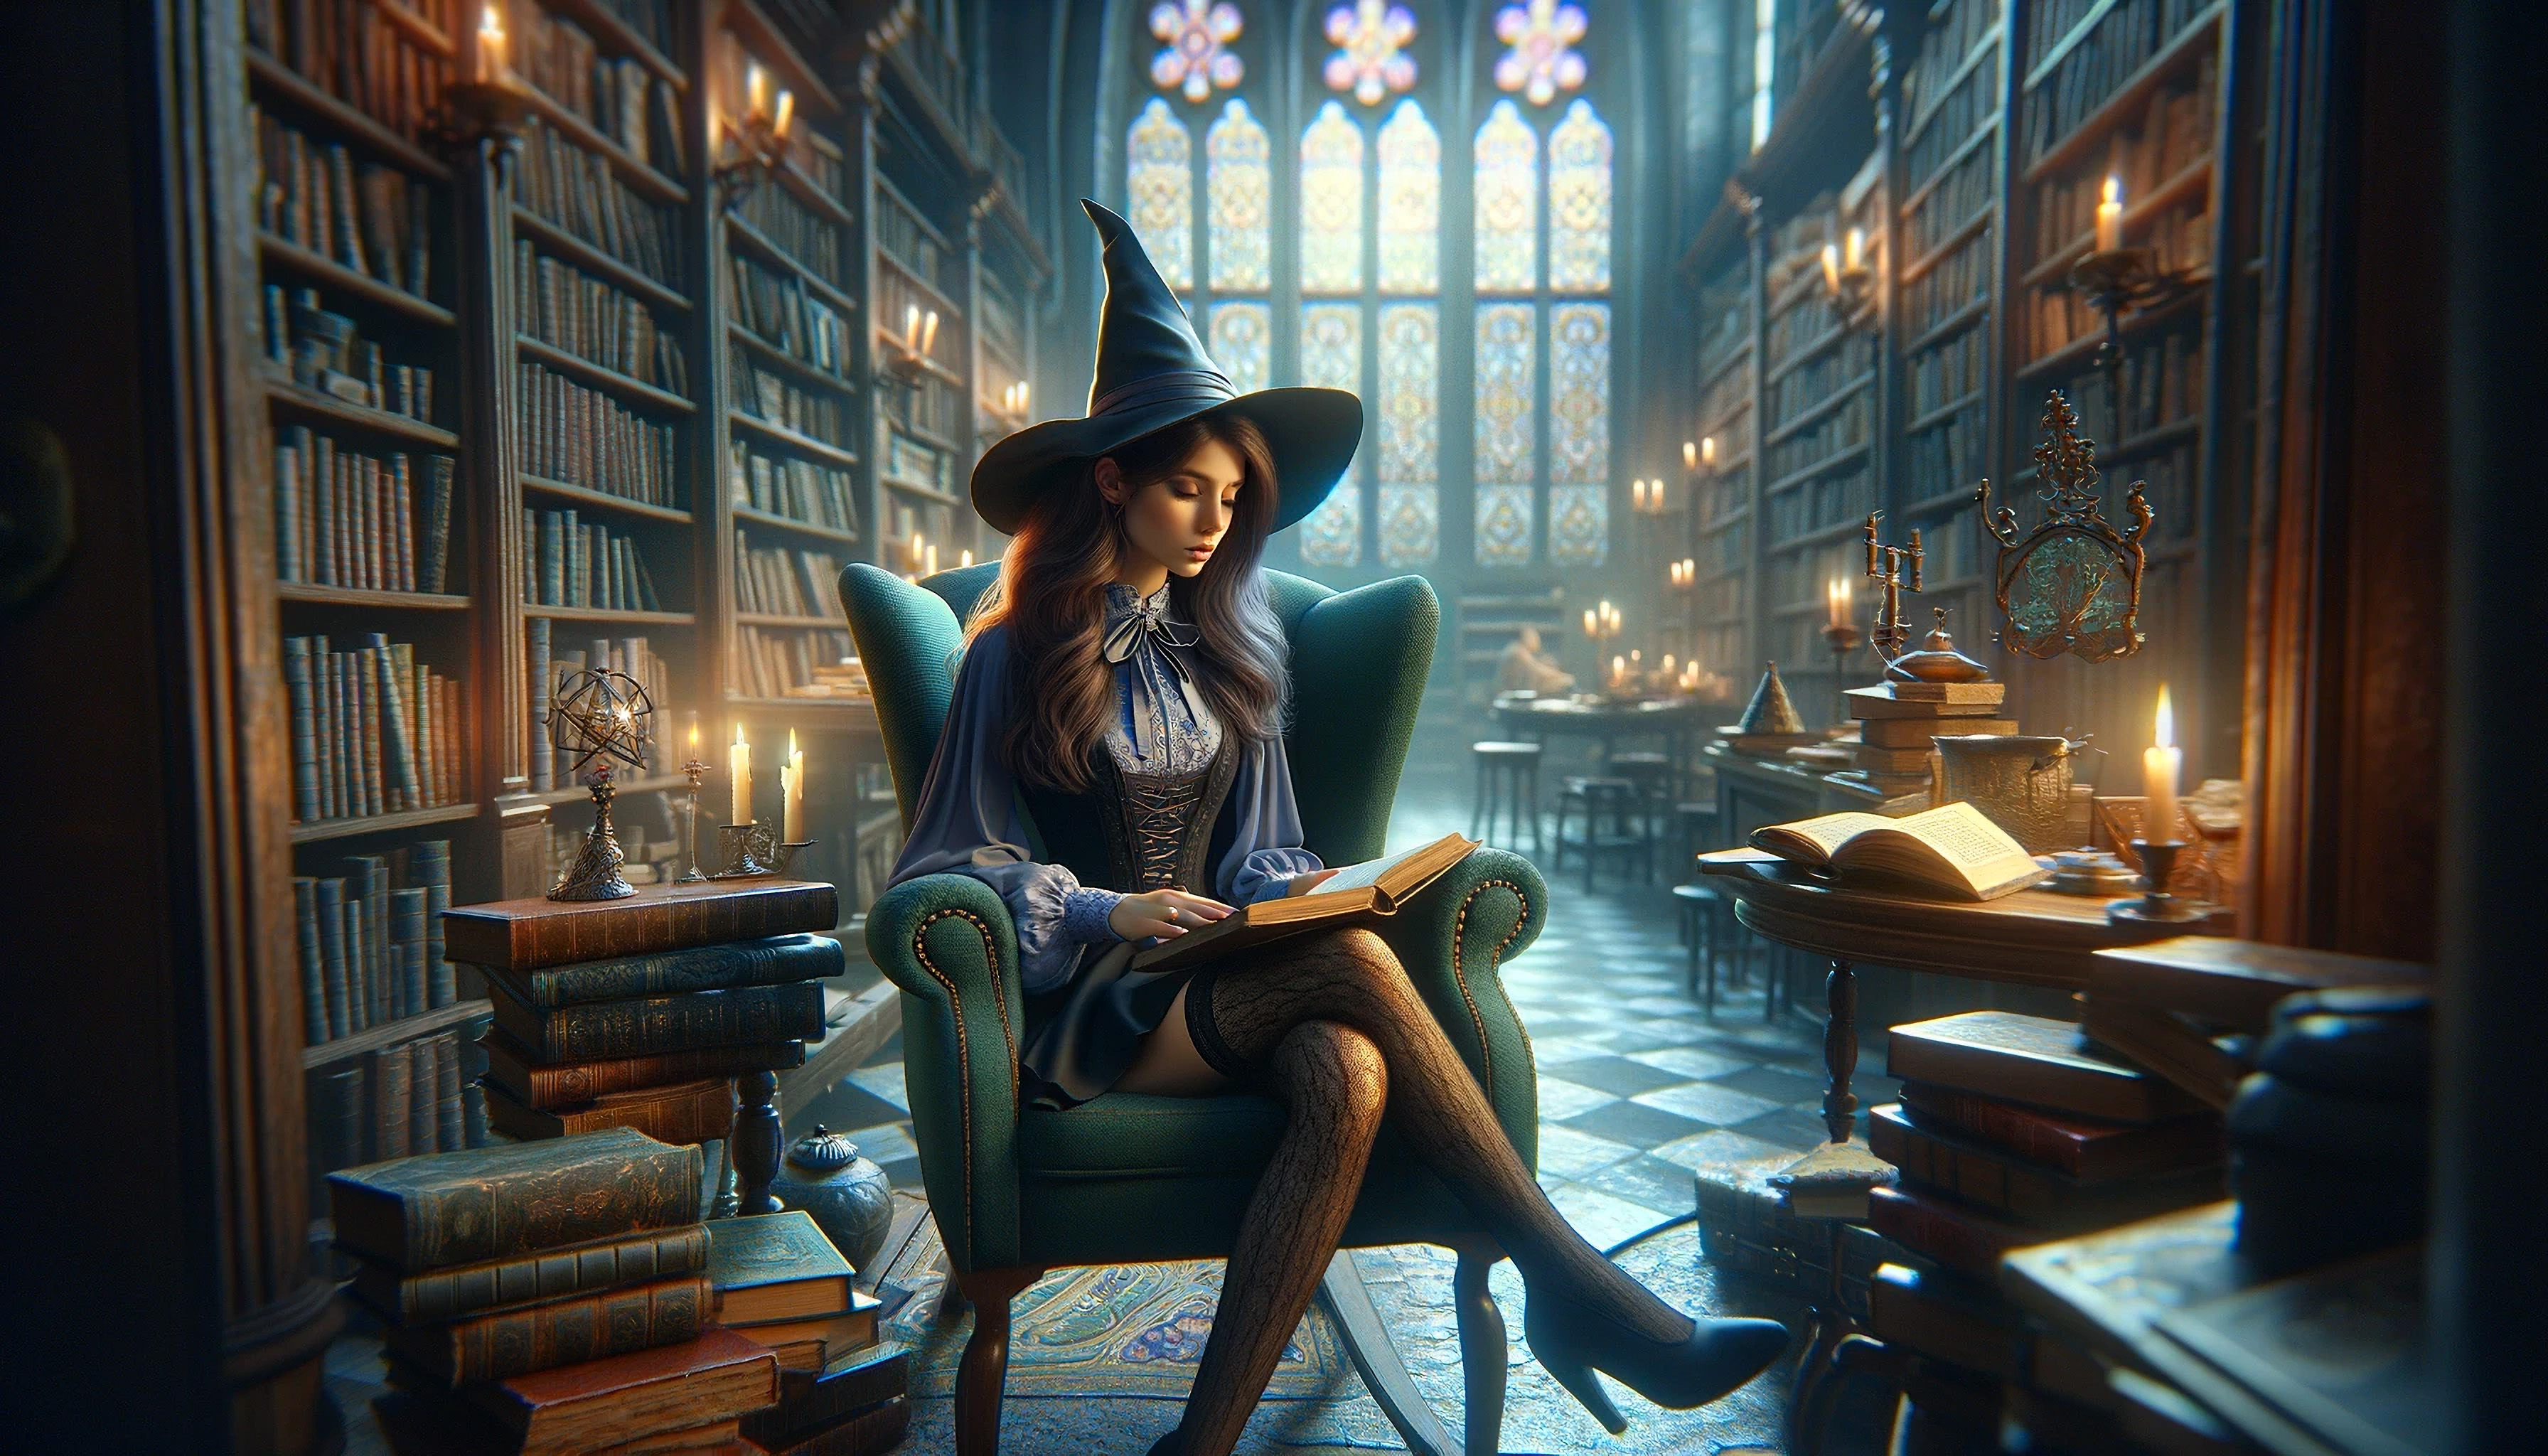 General 3584x2048 digital art witch library wizard wizard's hat wizarding world armchair reading book in hand sitting legs crossed books candles fire long hair stockings closed mouth stained glass AI art